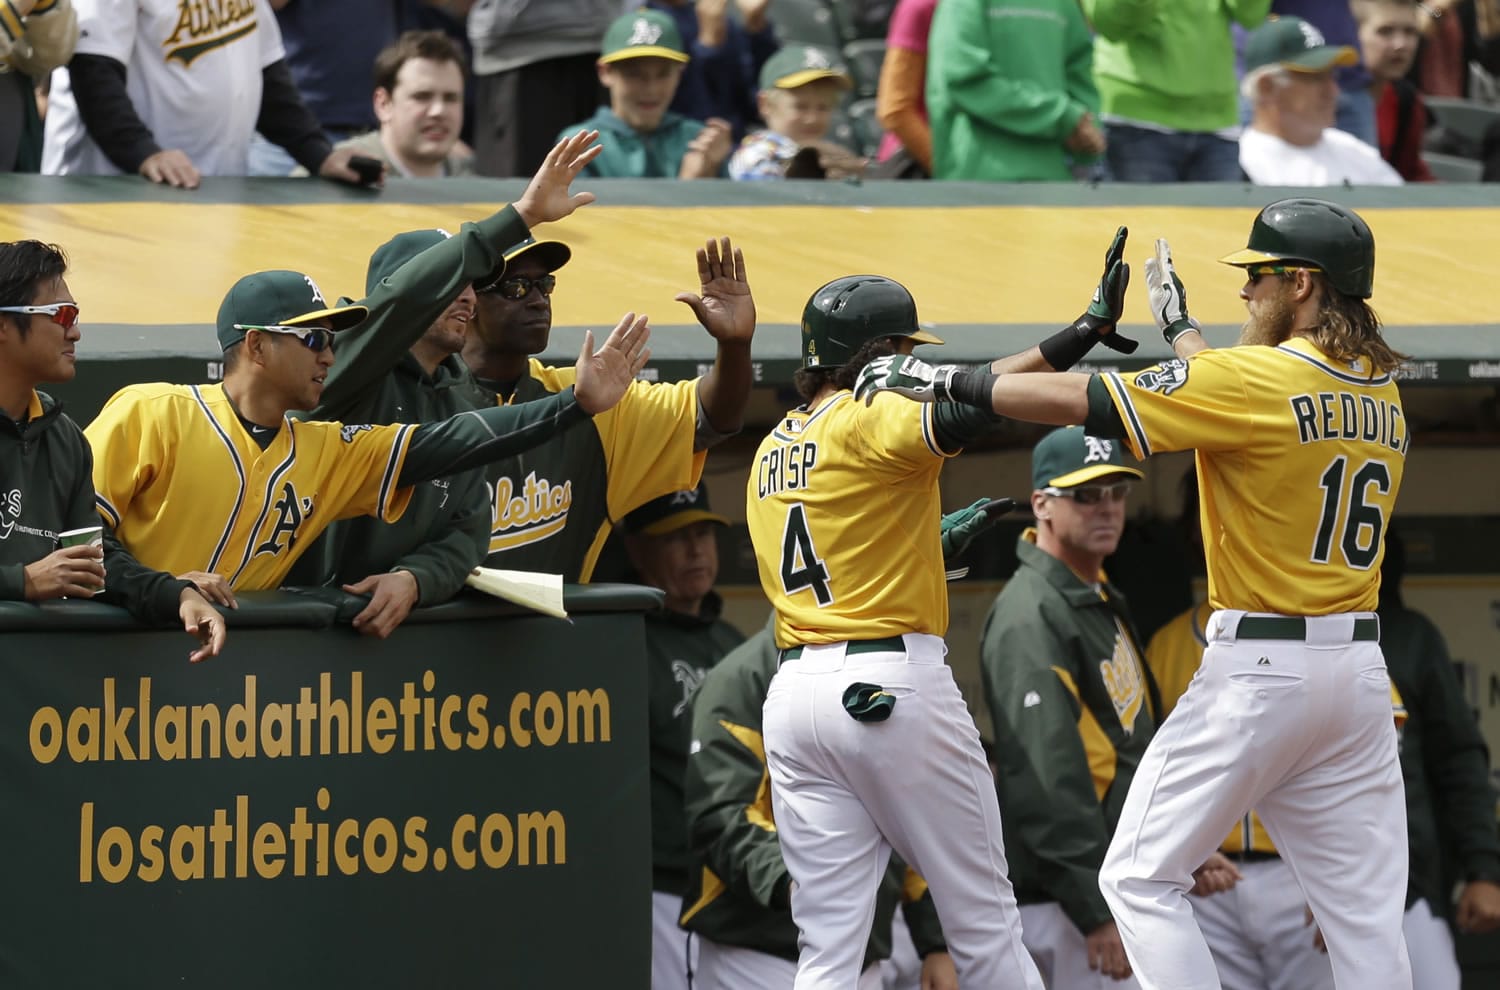 Oakland Athletics' Josh Reddick (16) and Coco Crisp (4) celebrate after Crisp scored against the Seattle Mariners in the eighth inning Thursday.